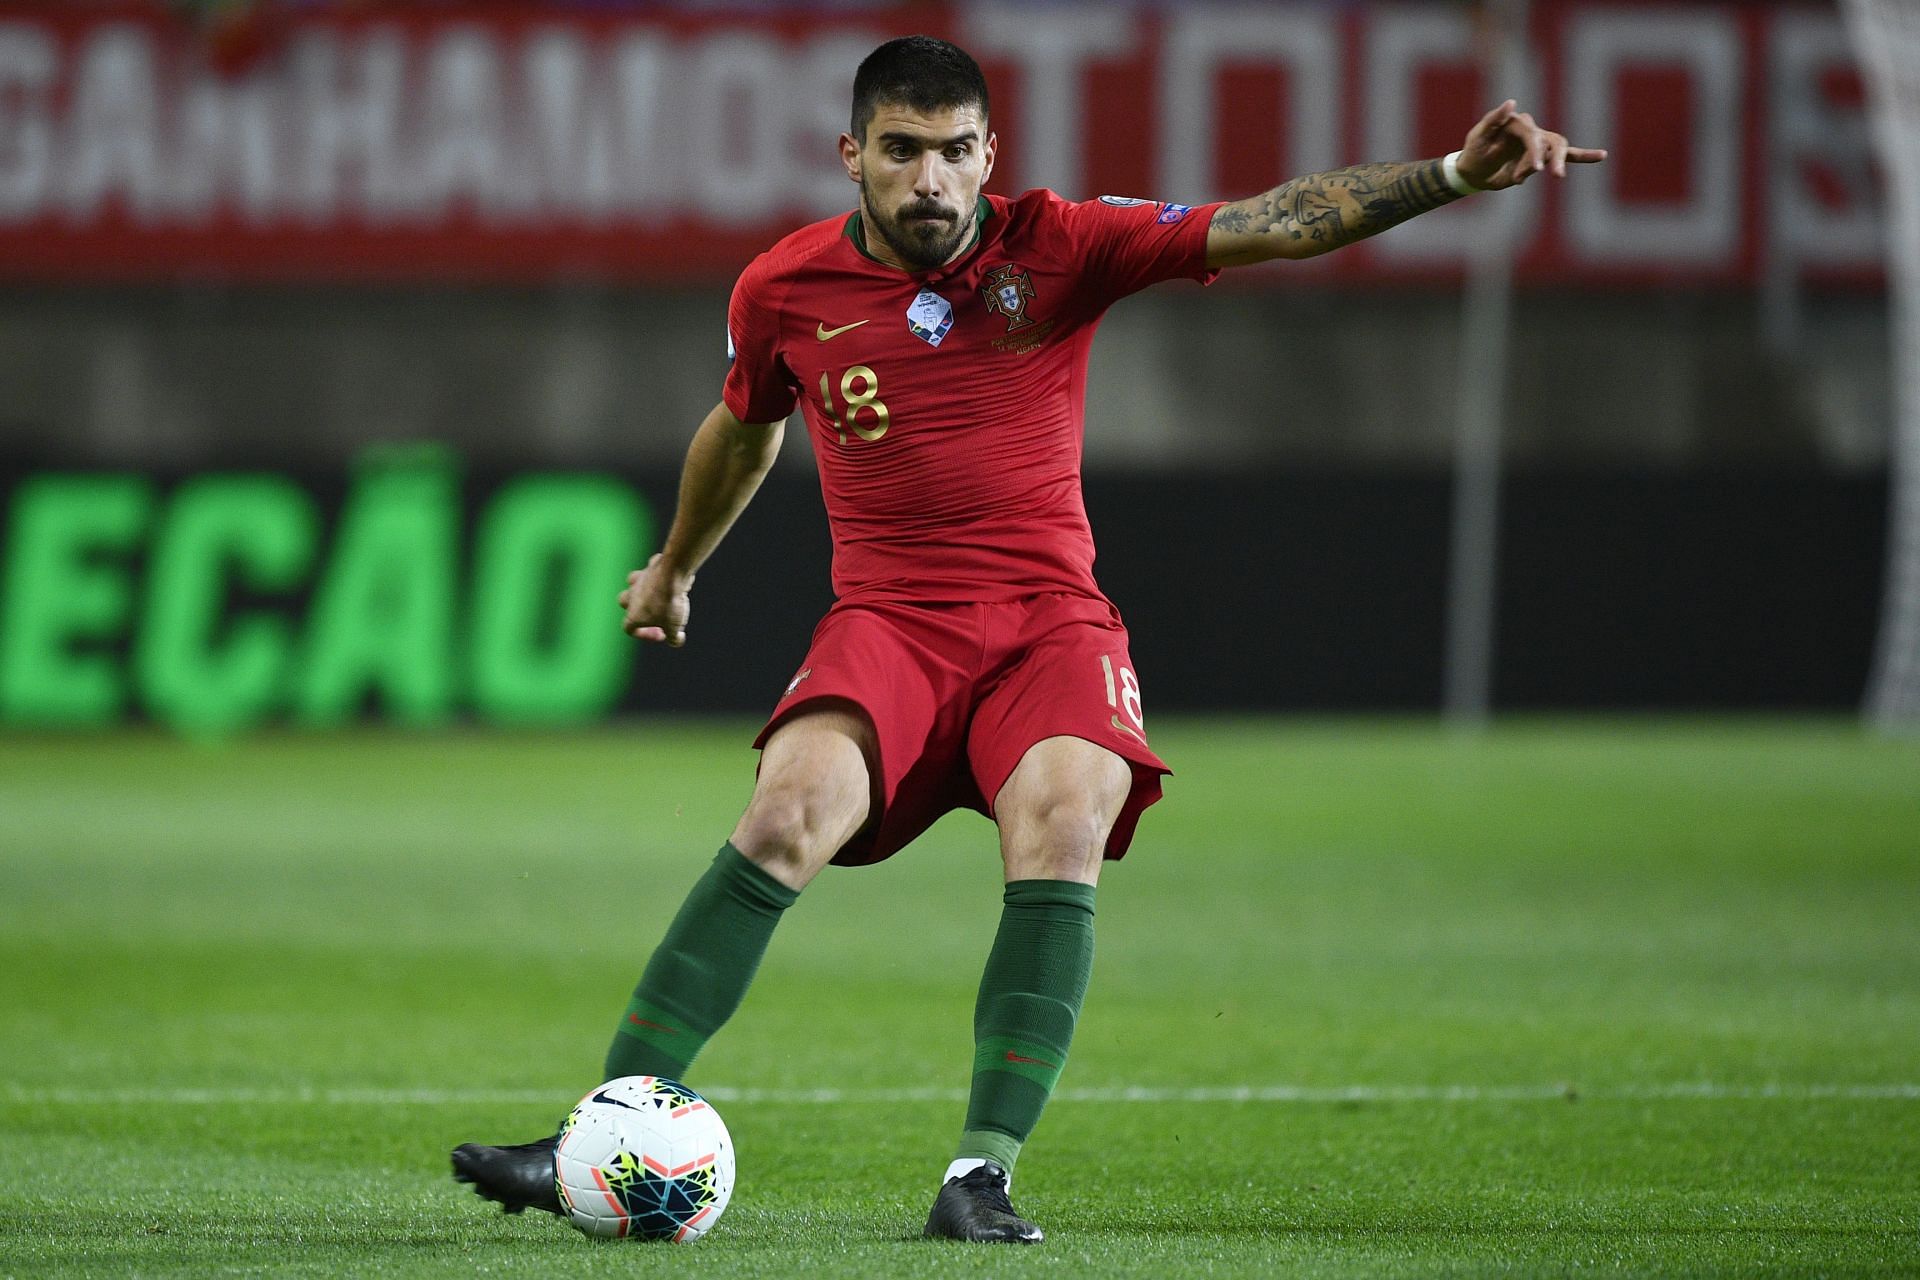 Neves in action against Lithuania - UEFA Euro 2020 Qualifier